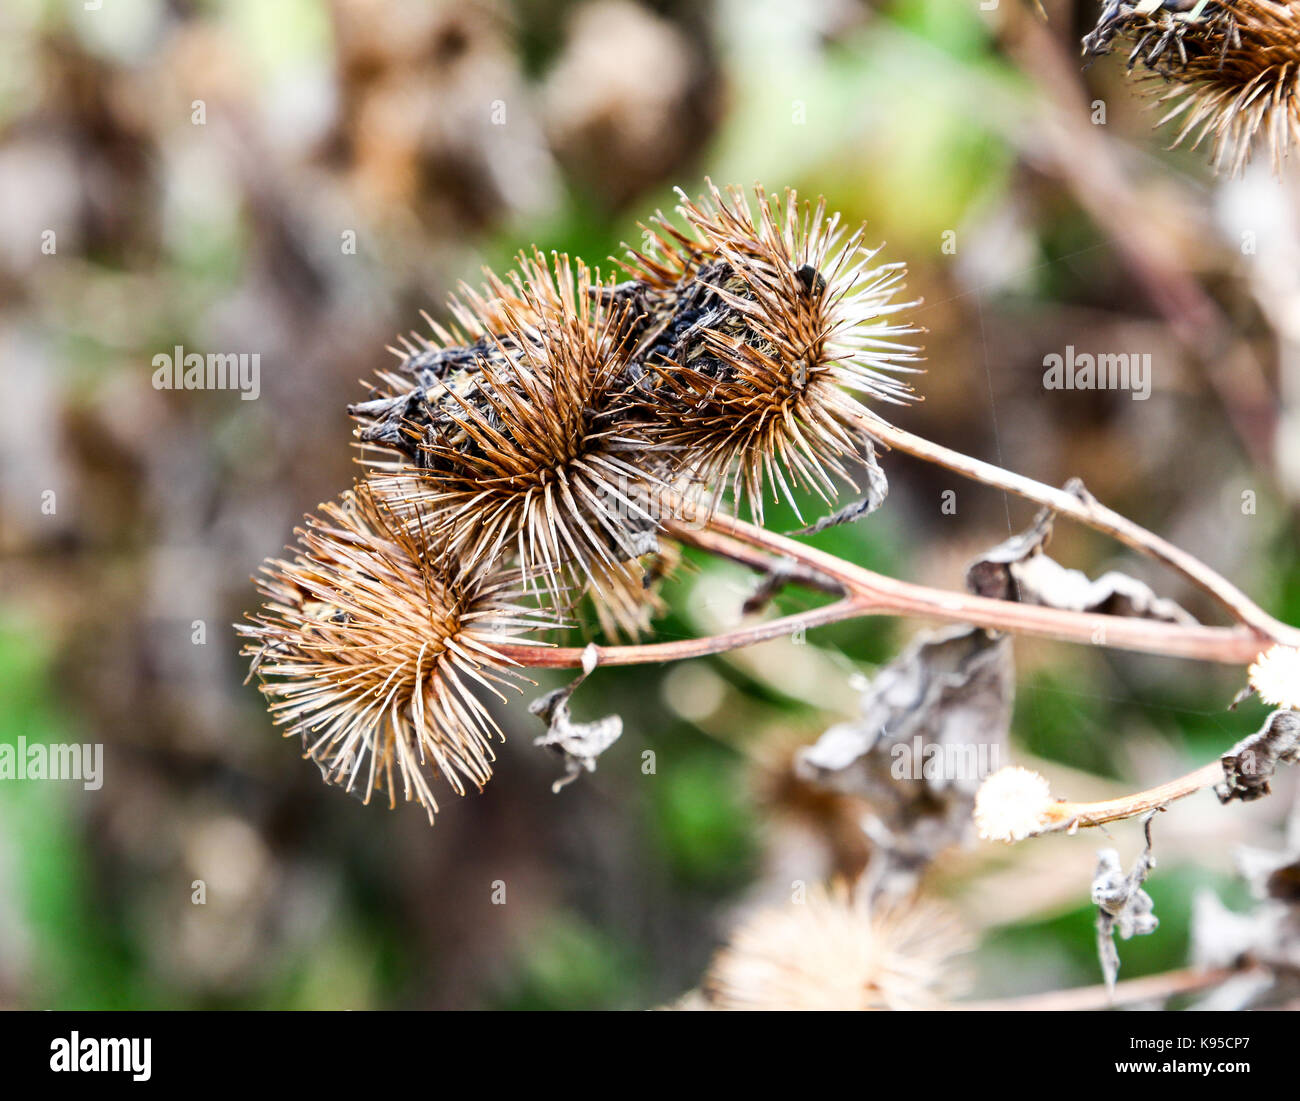 Spiked Seed heads or Burs or Burrs of an Arctium or Burdock plant Stock Photo